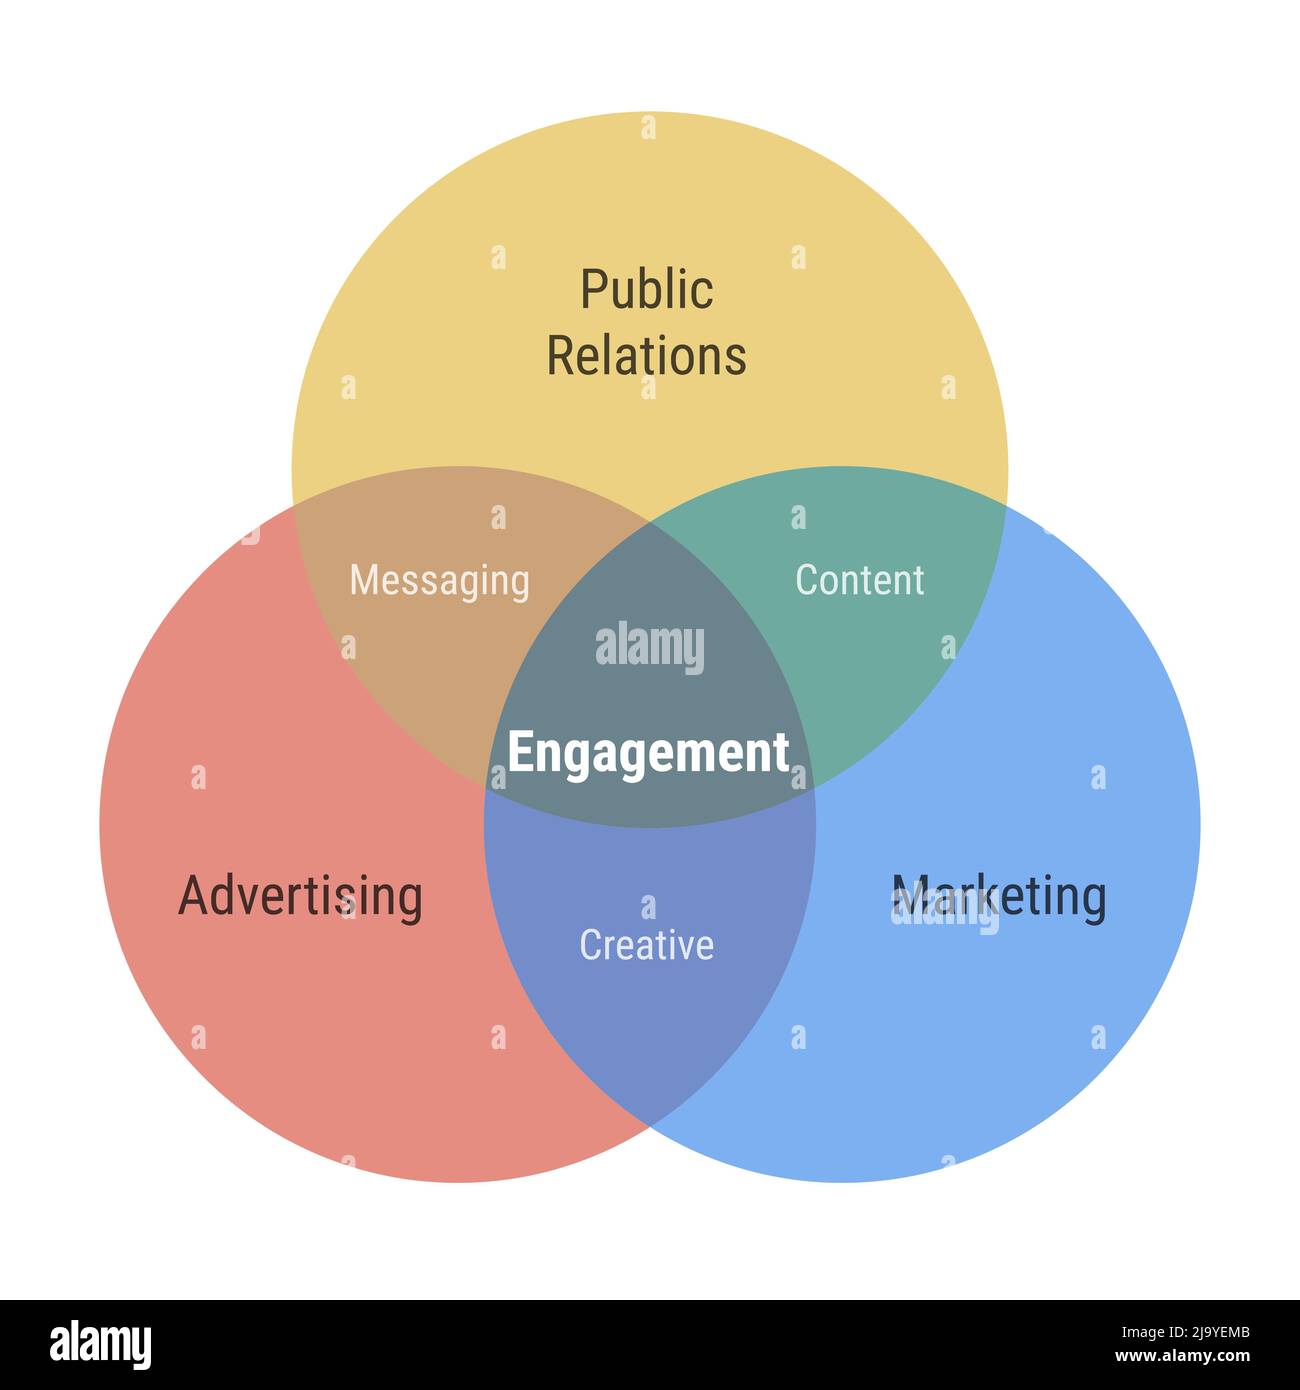 Engagement venn diagram 3 overlapping circles infographic. Public relations, advertising and marketing. Messaging, creative content. Flat design yello Stock Vector